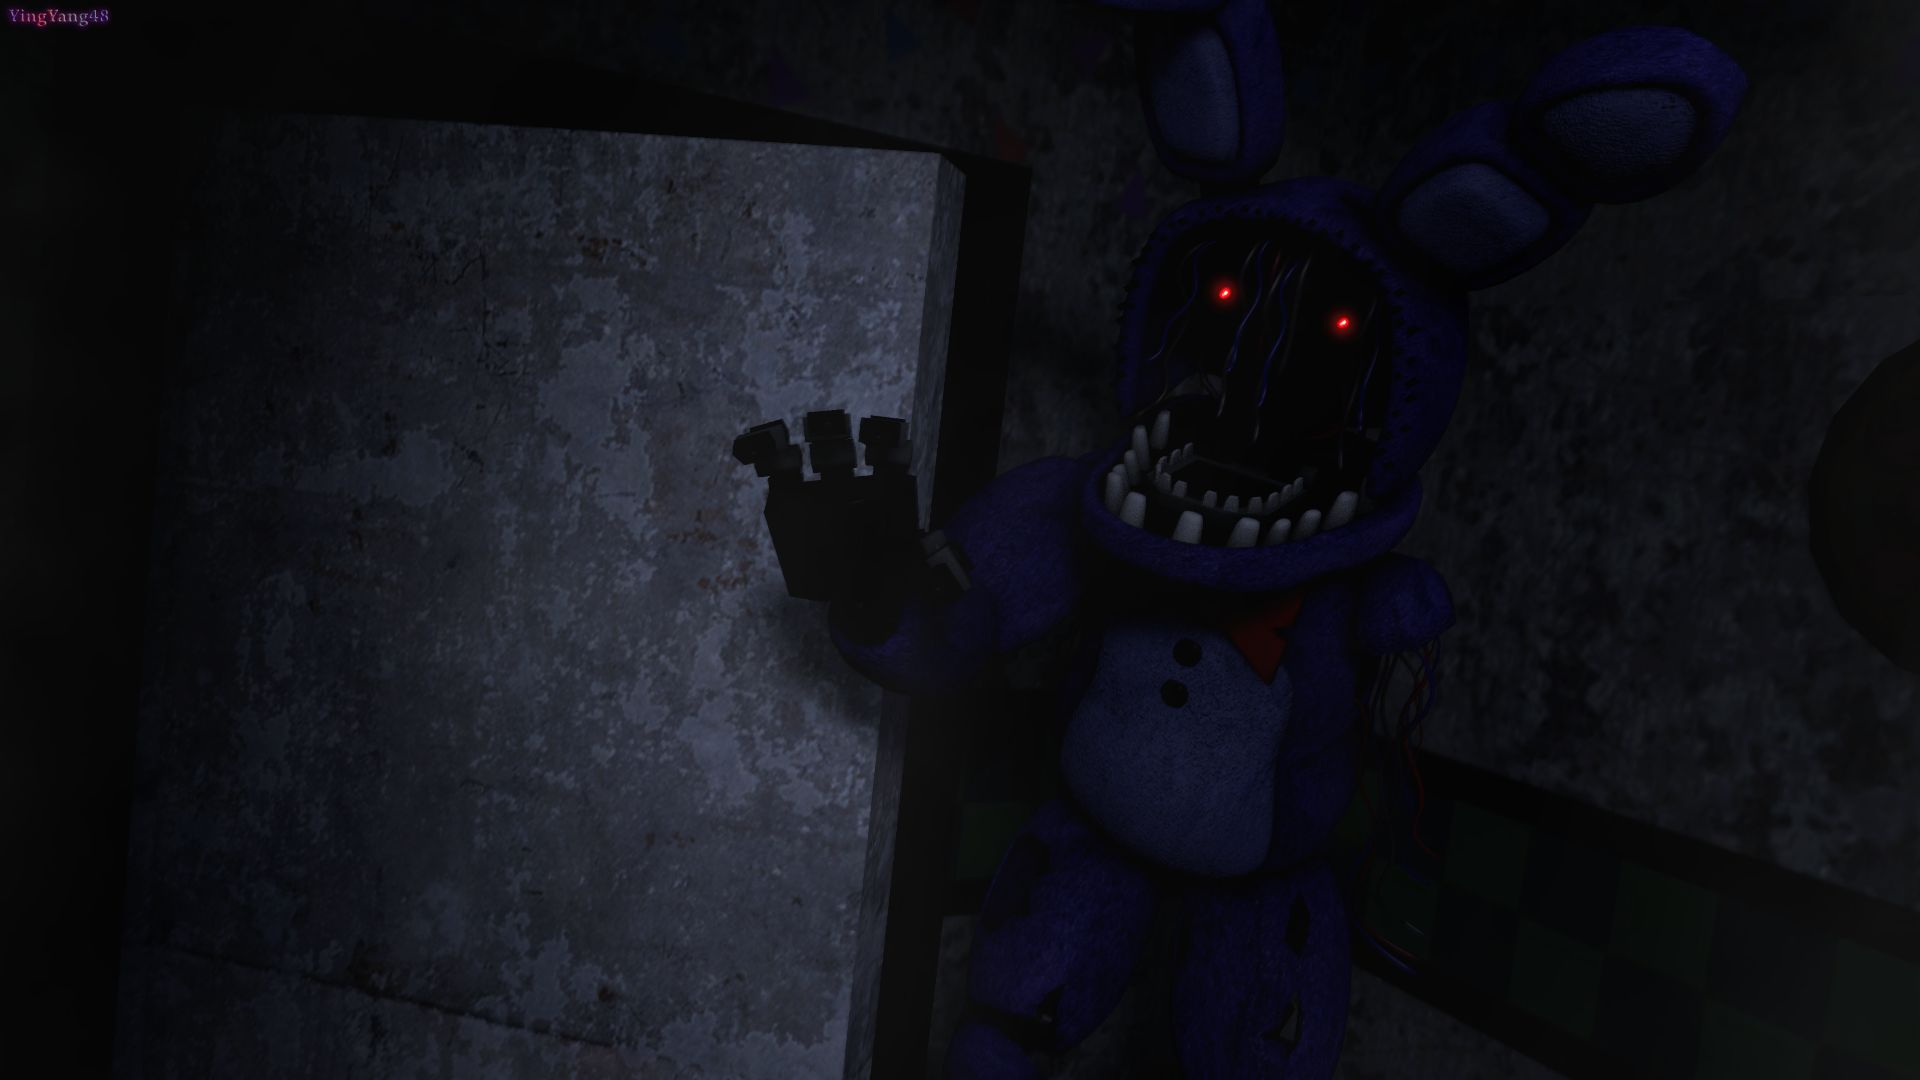 Video Game Five Nights At Freddy's 2 HD Wallpaper